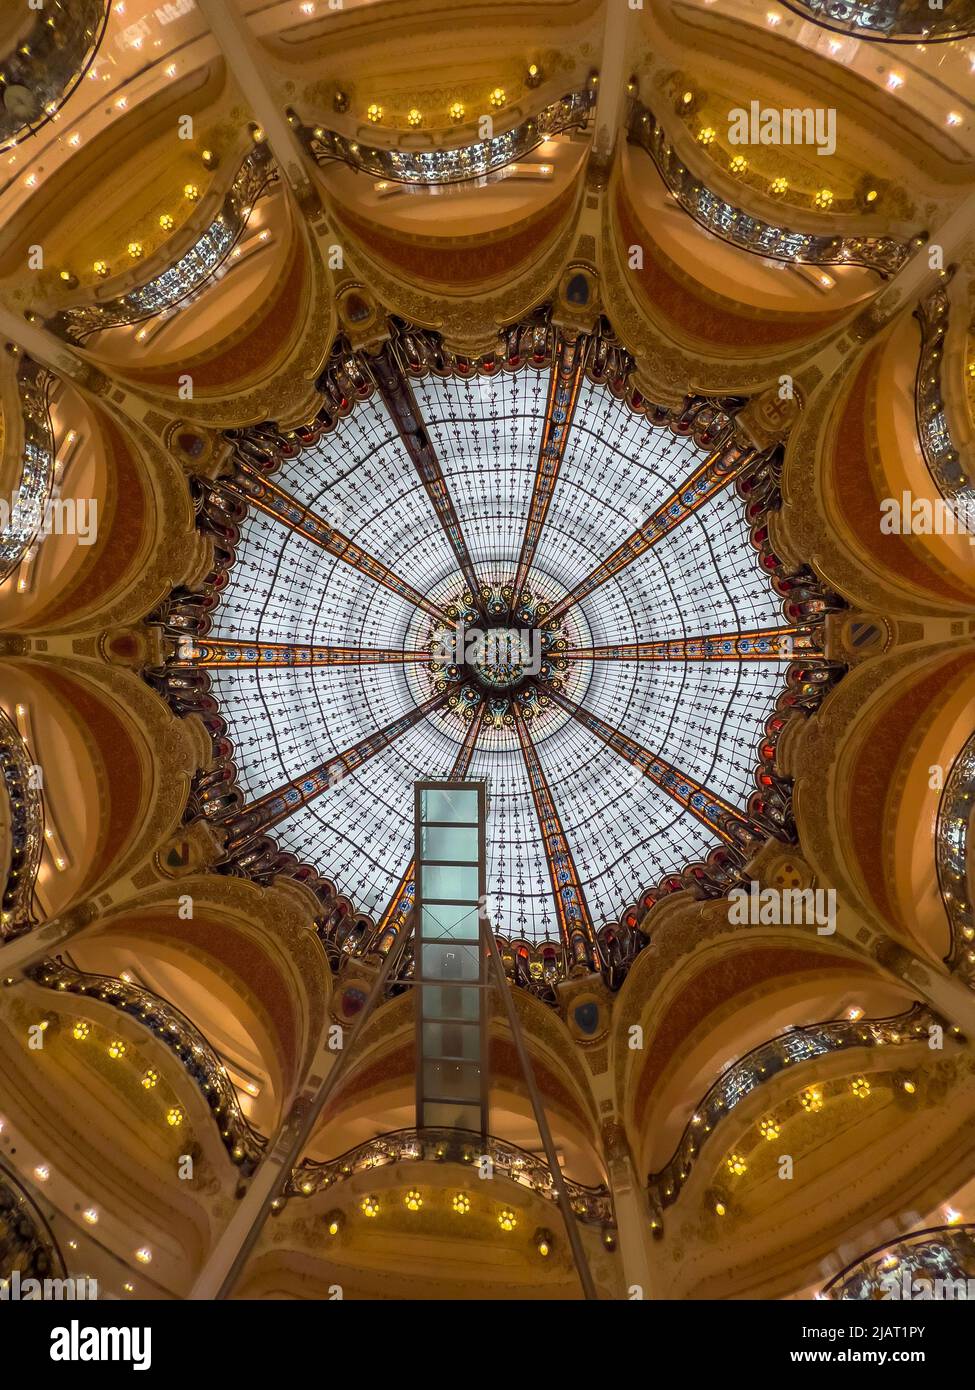 Paris, France - April 6, 2022: Directly below of Galleria la Fayette glass ceiling. Colorful stained glass ceiling at daytime inside shopping mall. Stock Photo